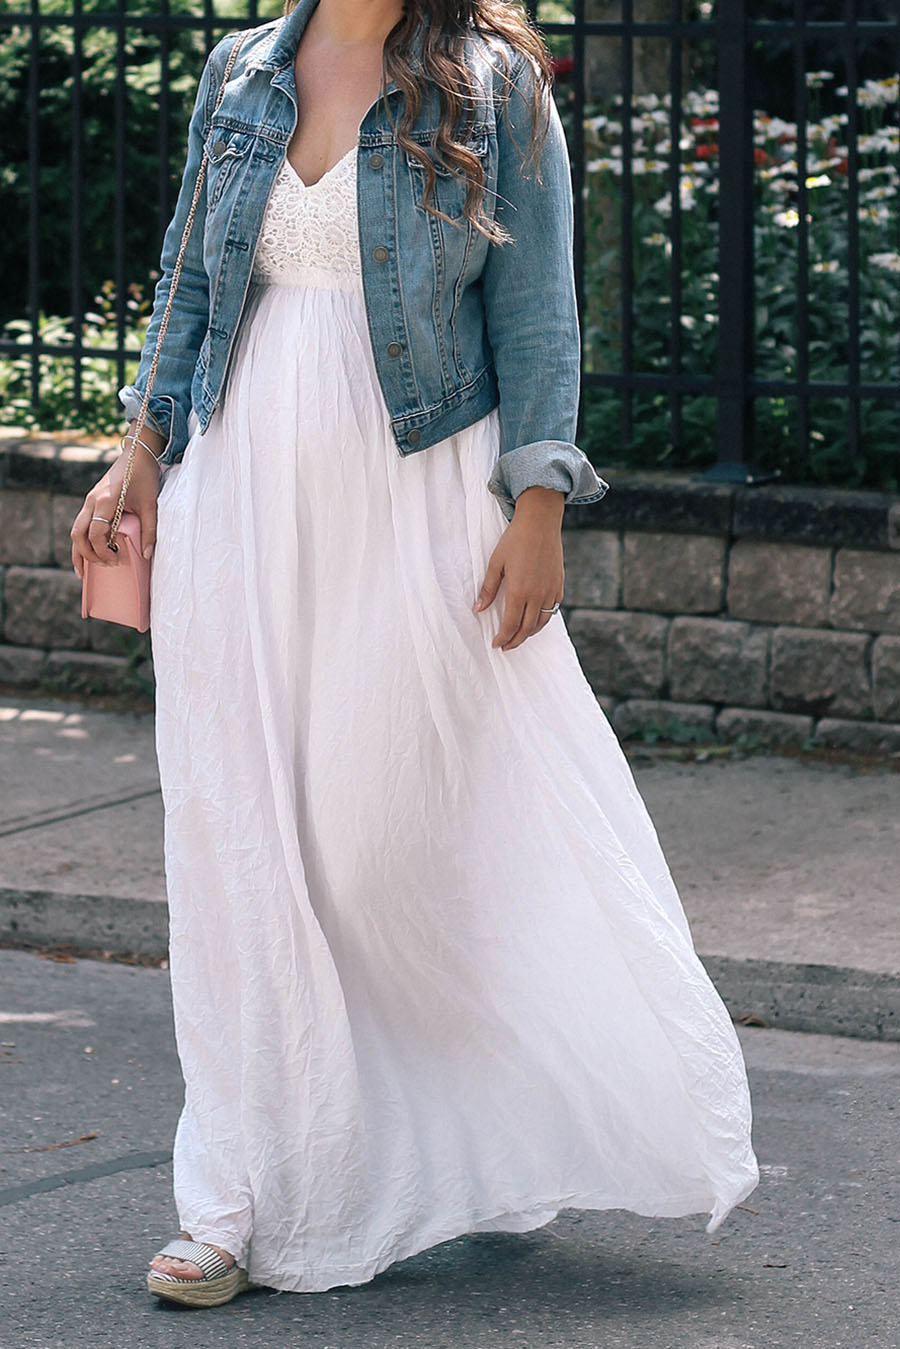 white-maxi-dress-with-denim-jacket-fashion-style-ideas - A Side Of Style